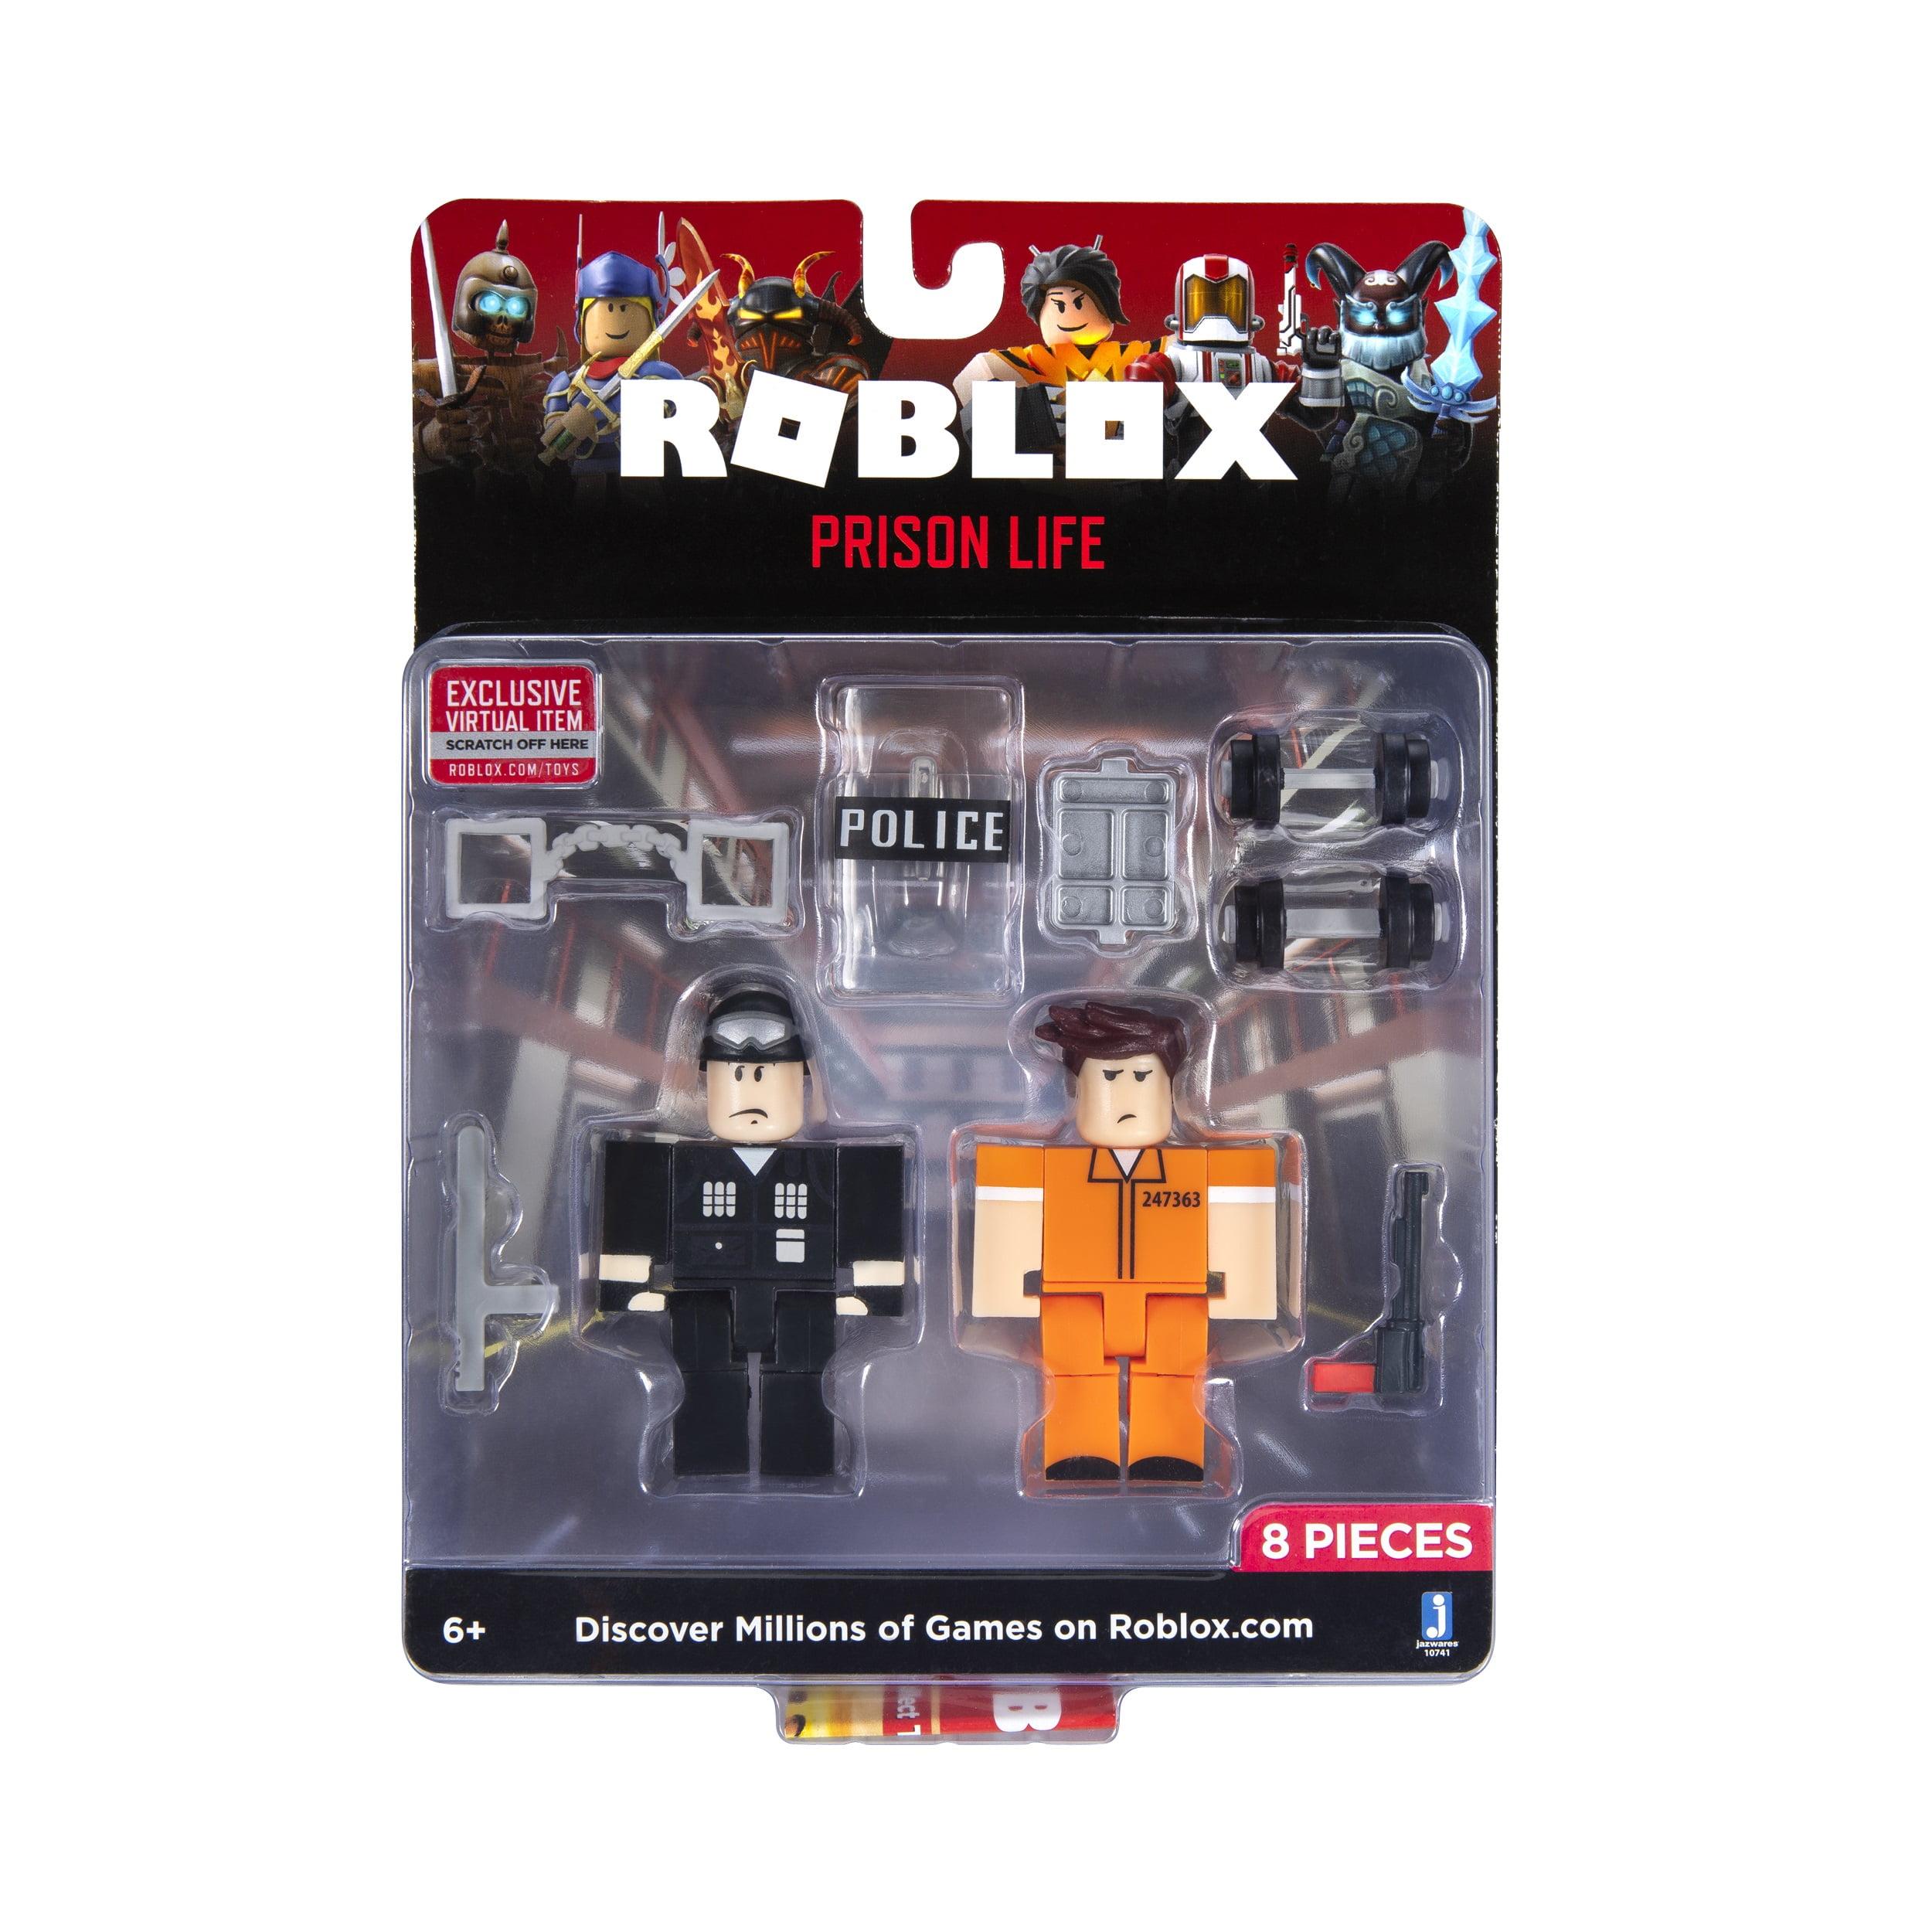 Roblox Action Collection Prison Life Game Pack Includes Exclusive Virtual Item Walmart Com Walmart Com - roblox museum heist toy walmart